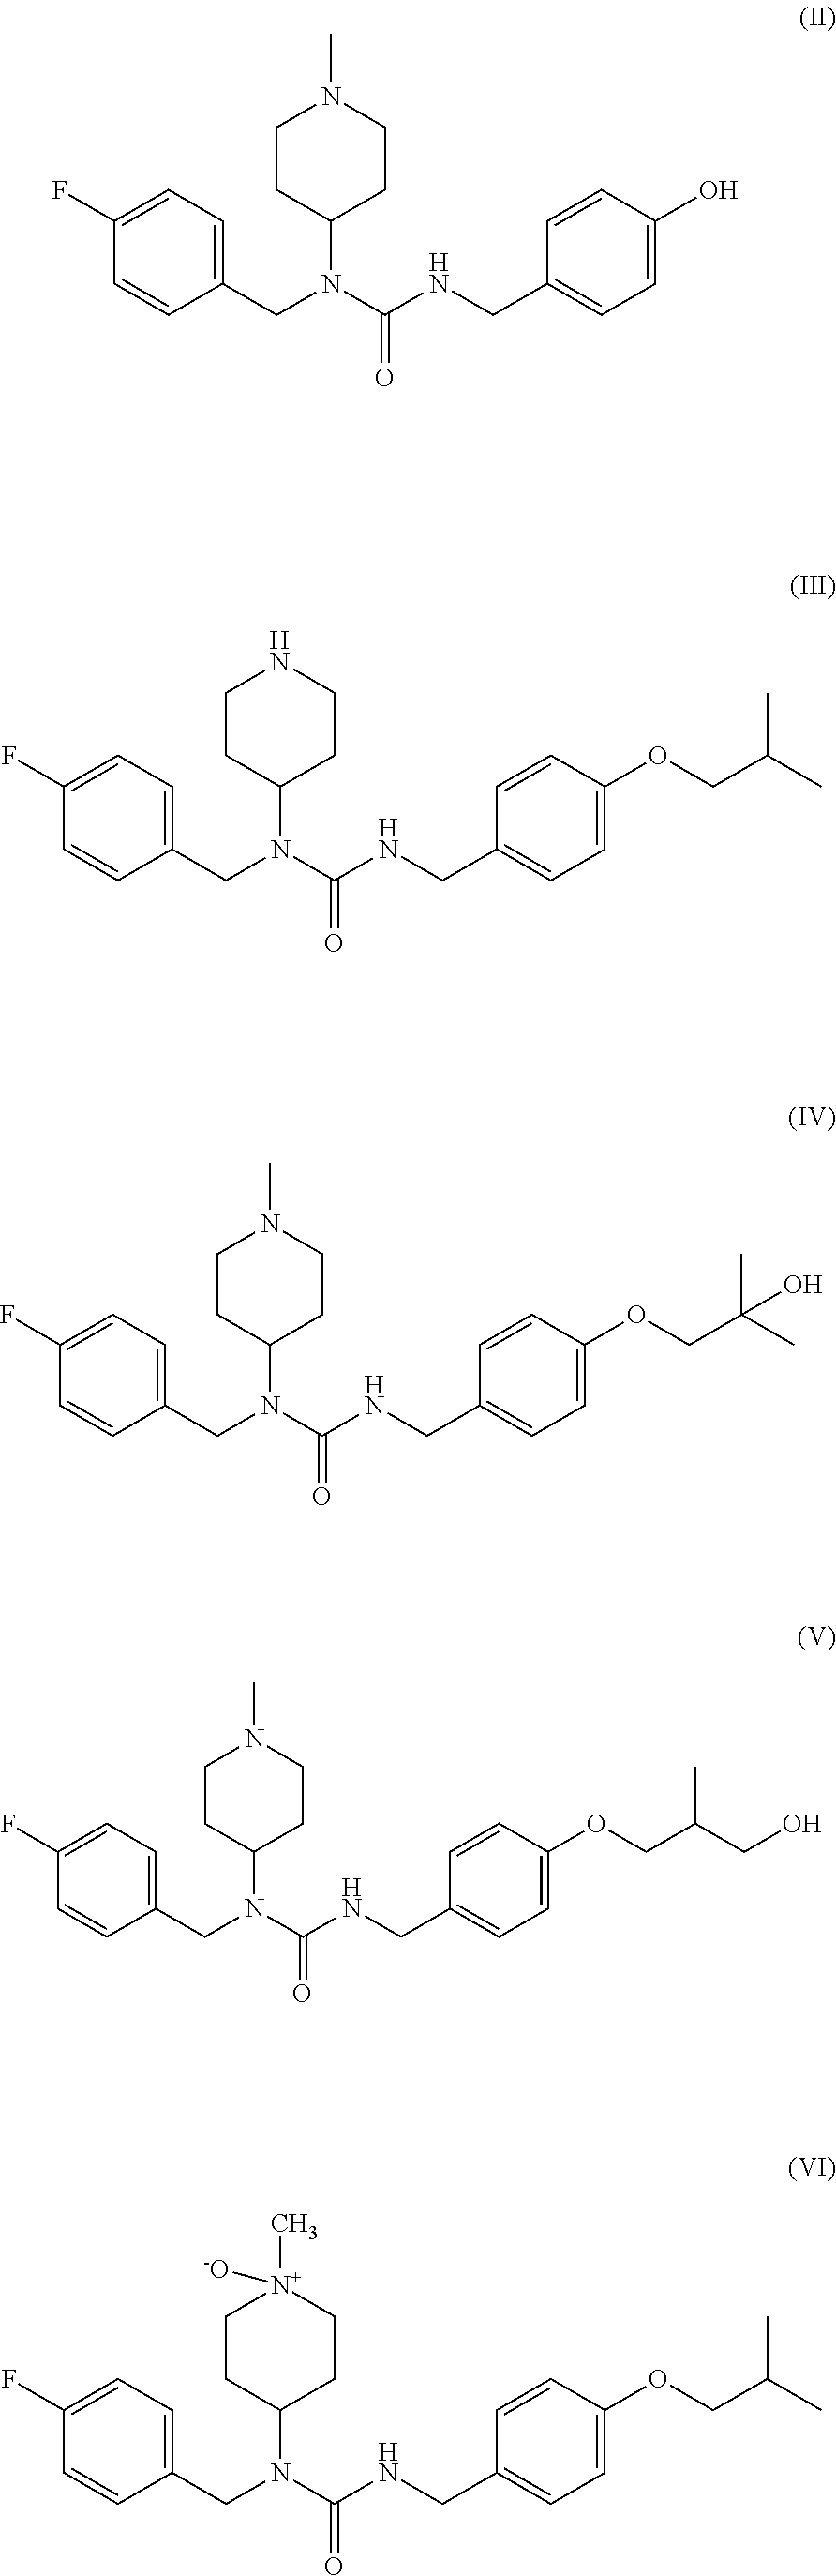 Co-administration of pimavanserin with other agents